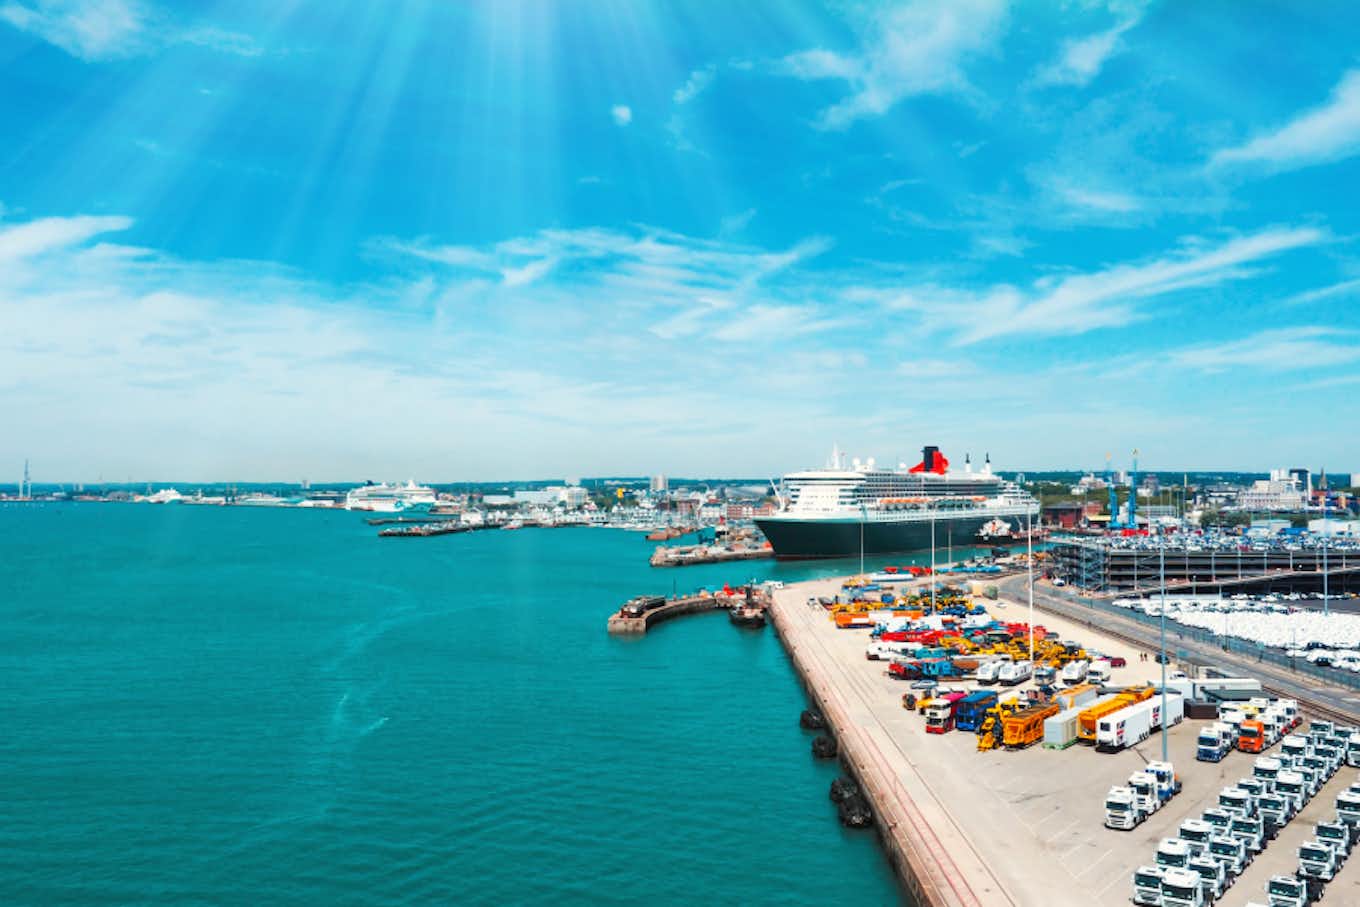 Overview of Southampton port with docked cruise ships.